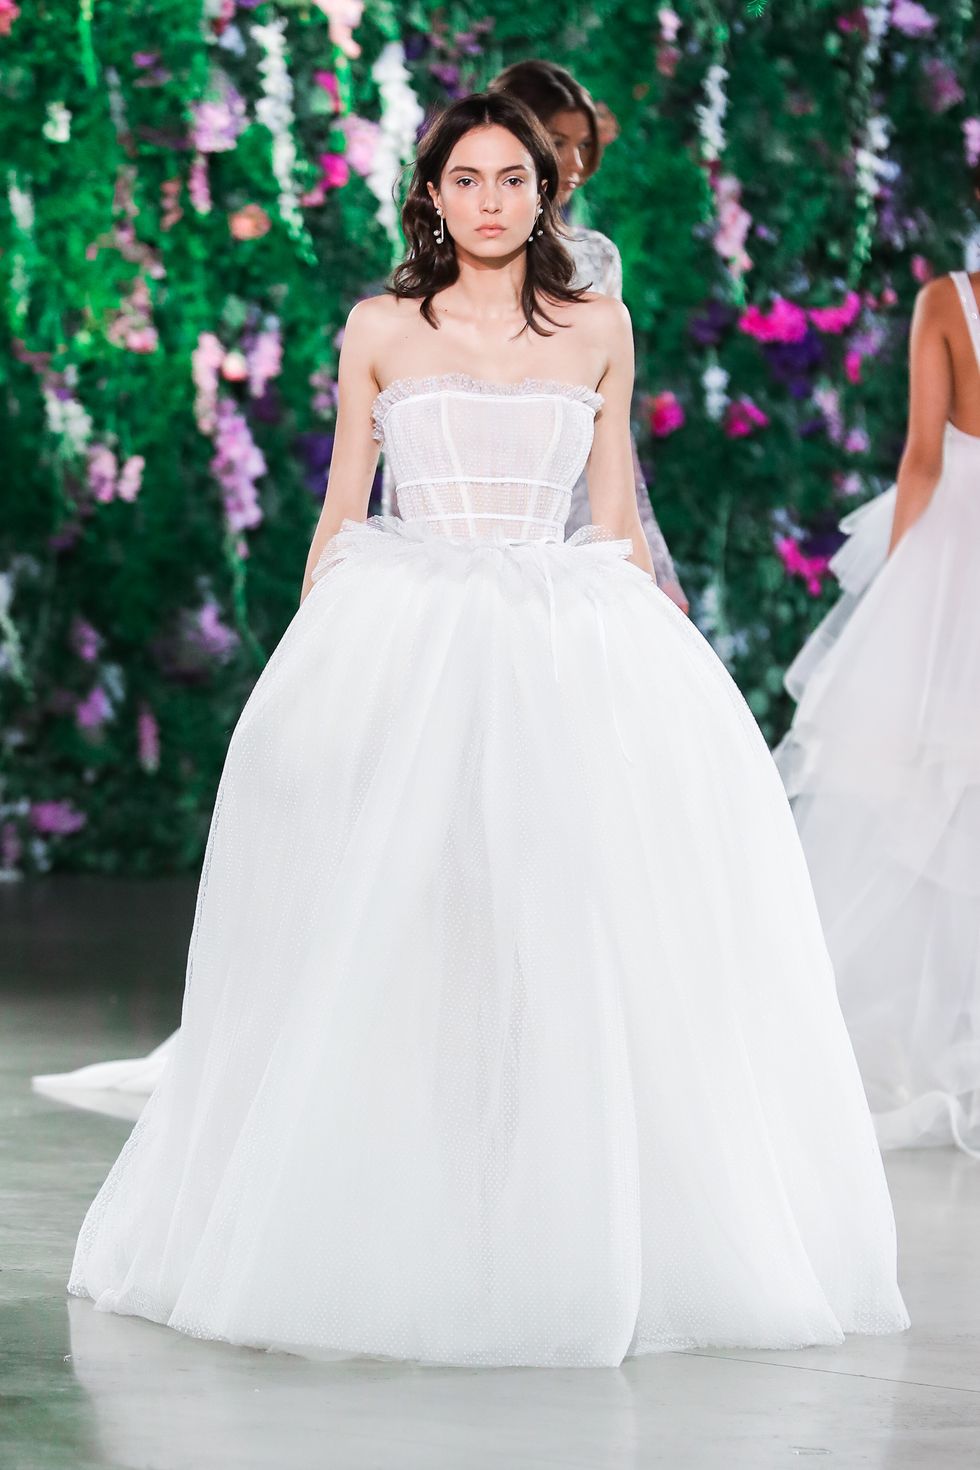 The Best Looks From Bridal Fall 2018